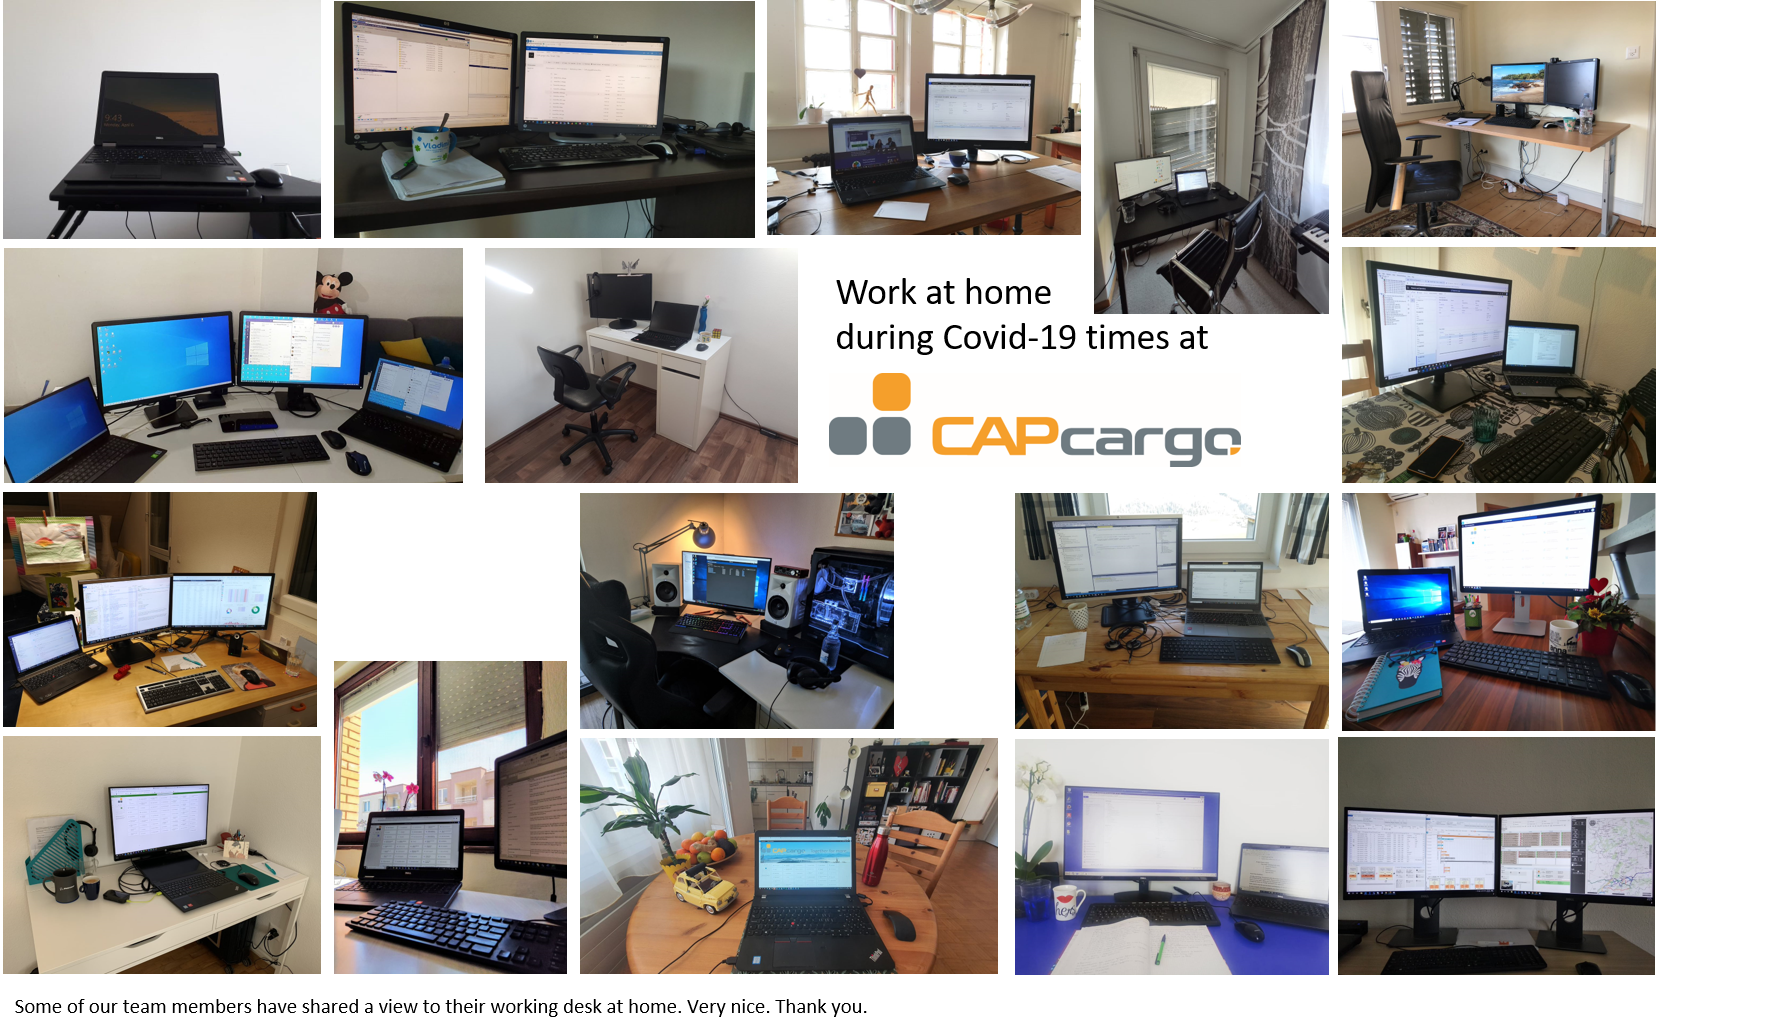 Home office Covid 19 workplaces employees CAPcargo